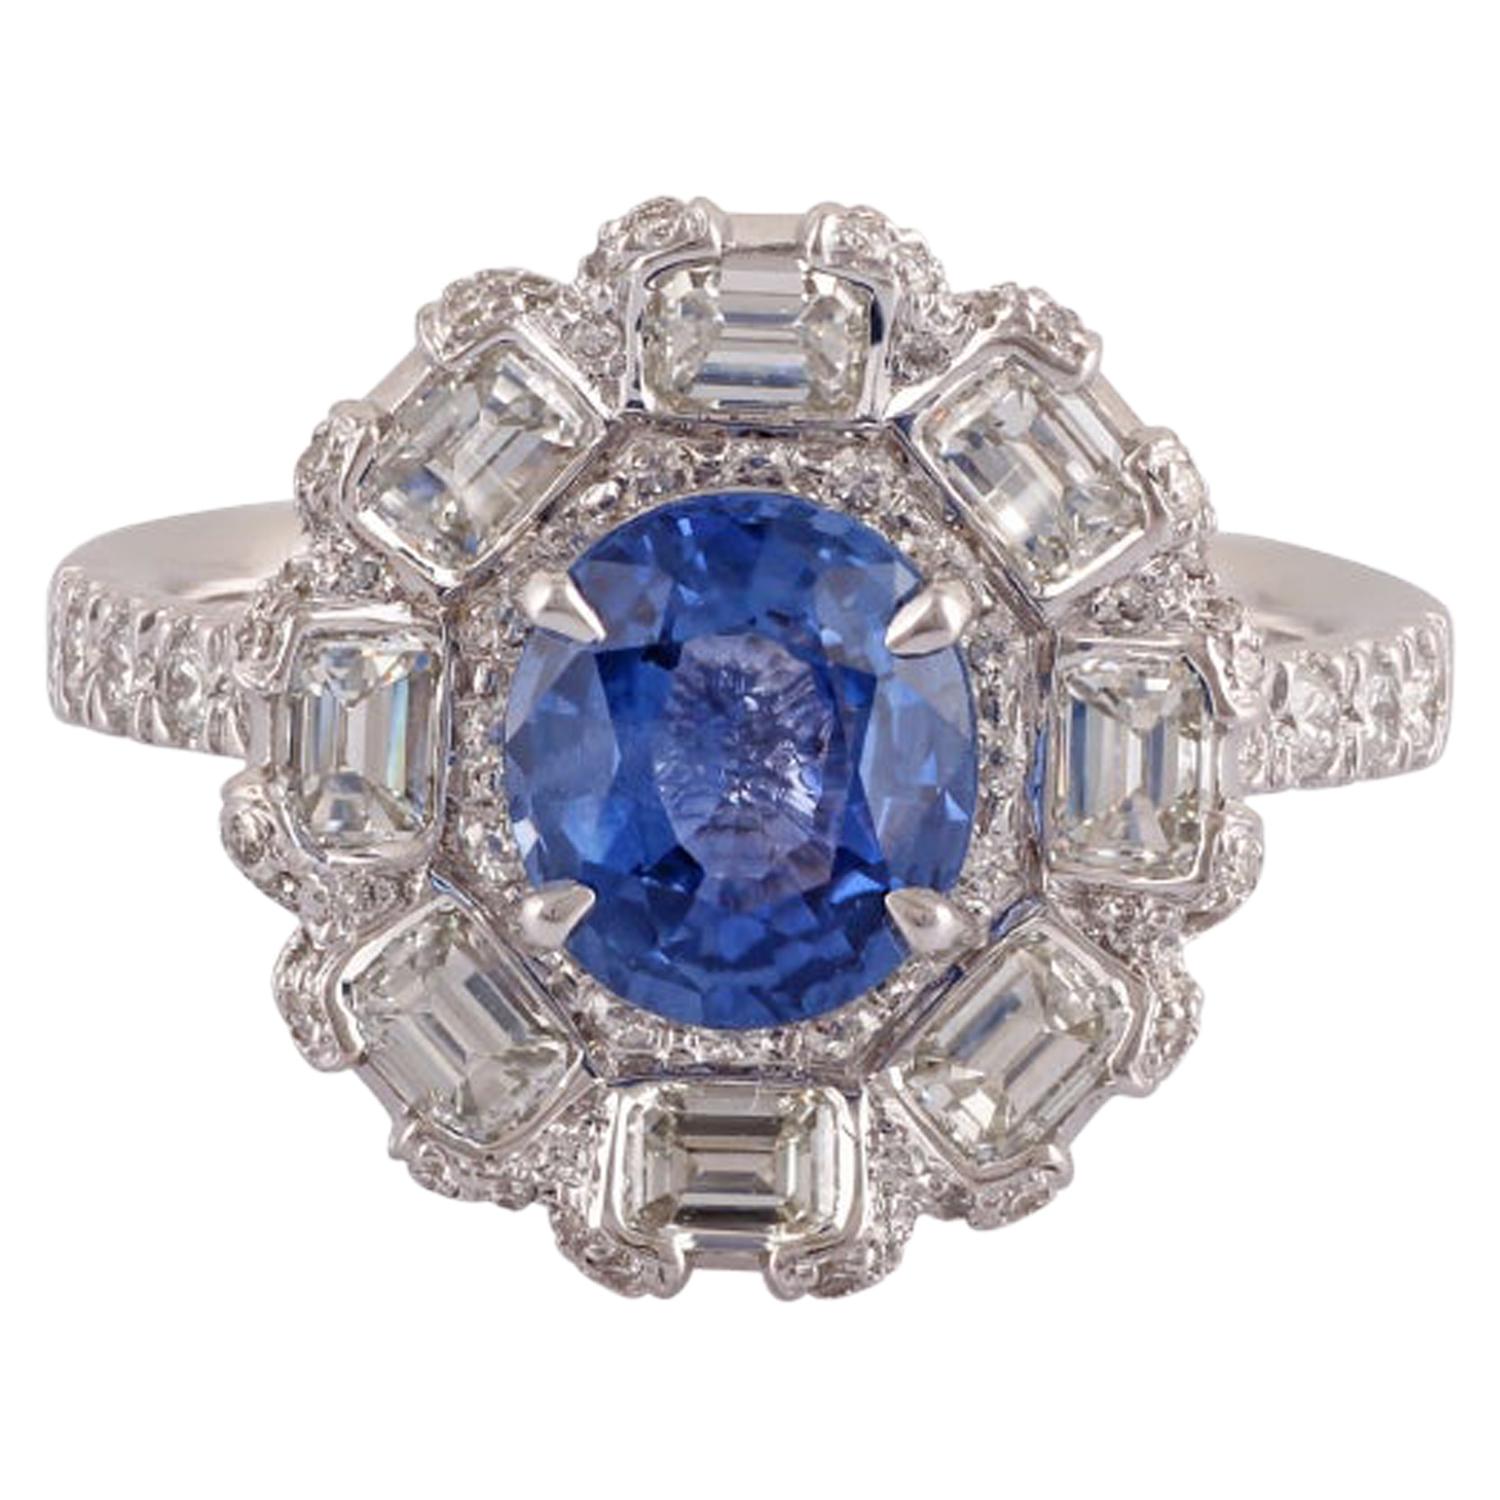 1.83 Carat Blue Sapphire and Diamond Ring in 18 Karat White Gold For Sale